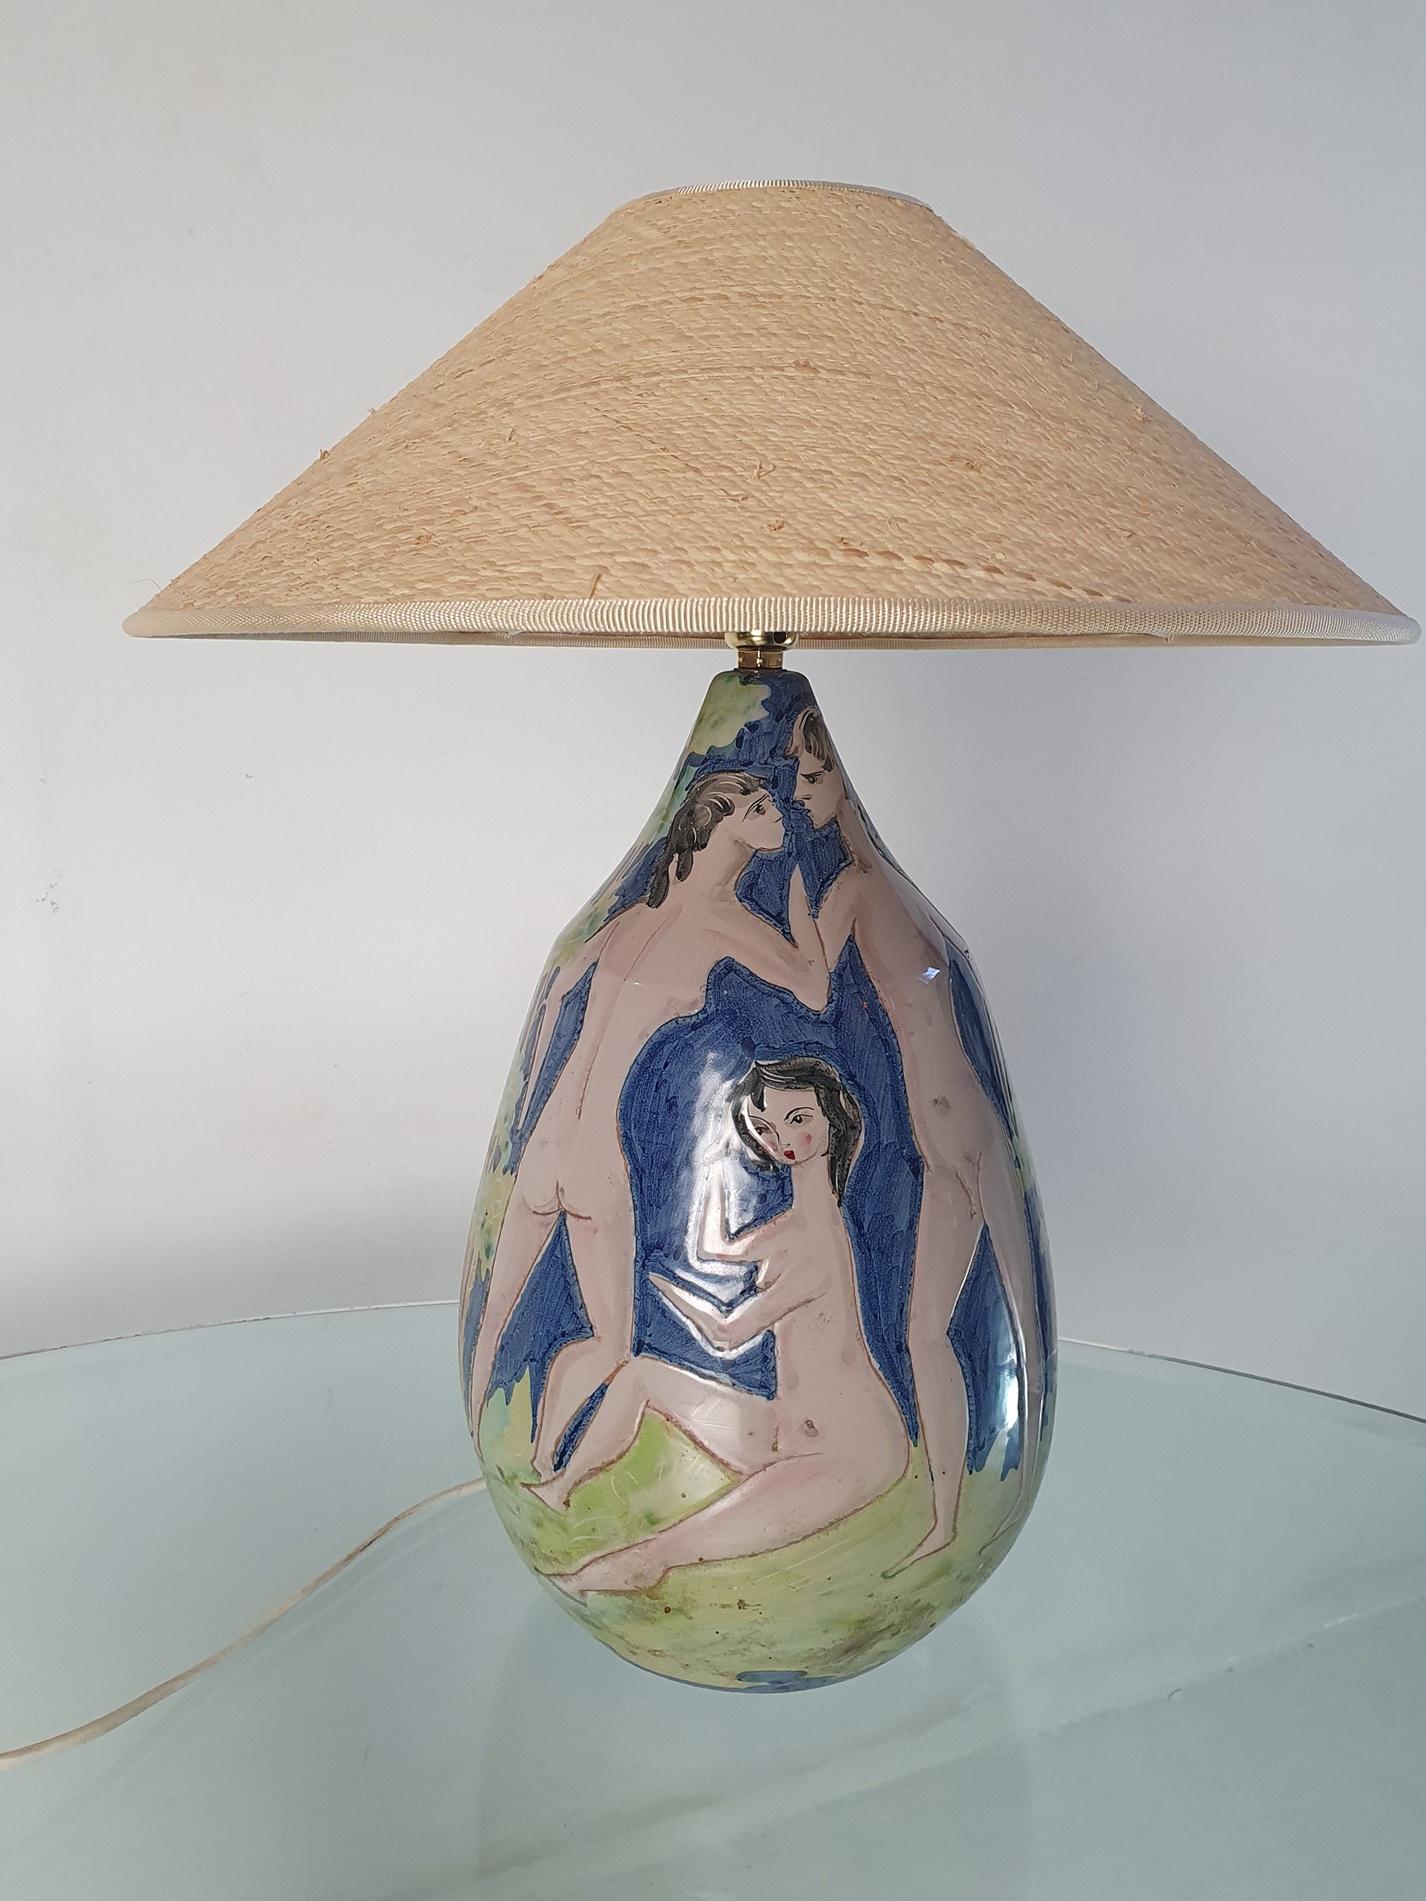 Adorn your living space with this one-of-a-kind Italian Studio Pottery Midcentury table lamp, lovingly handmade and hand-painted in the 1950s. The lamp is marked with a model number and the word 